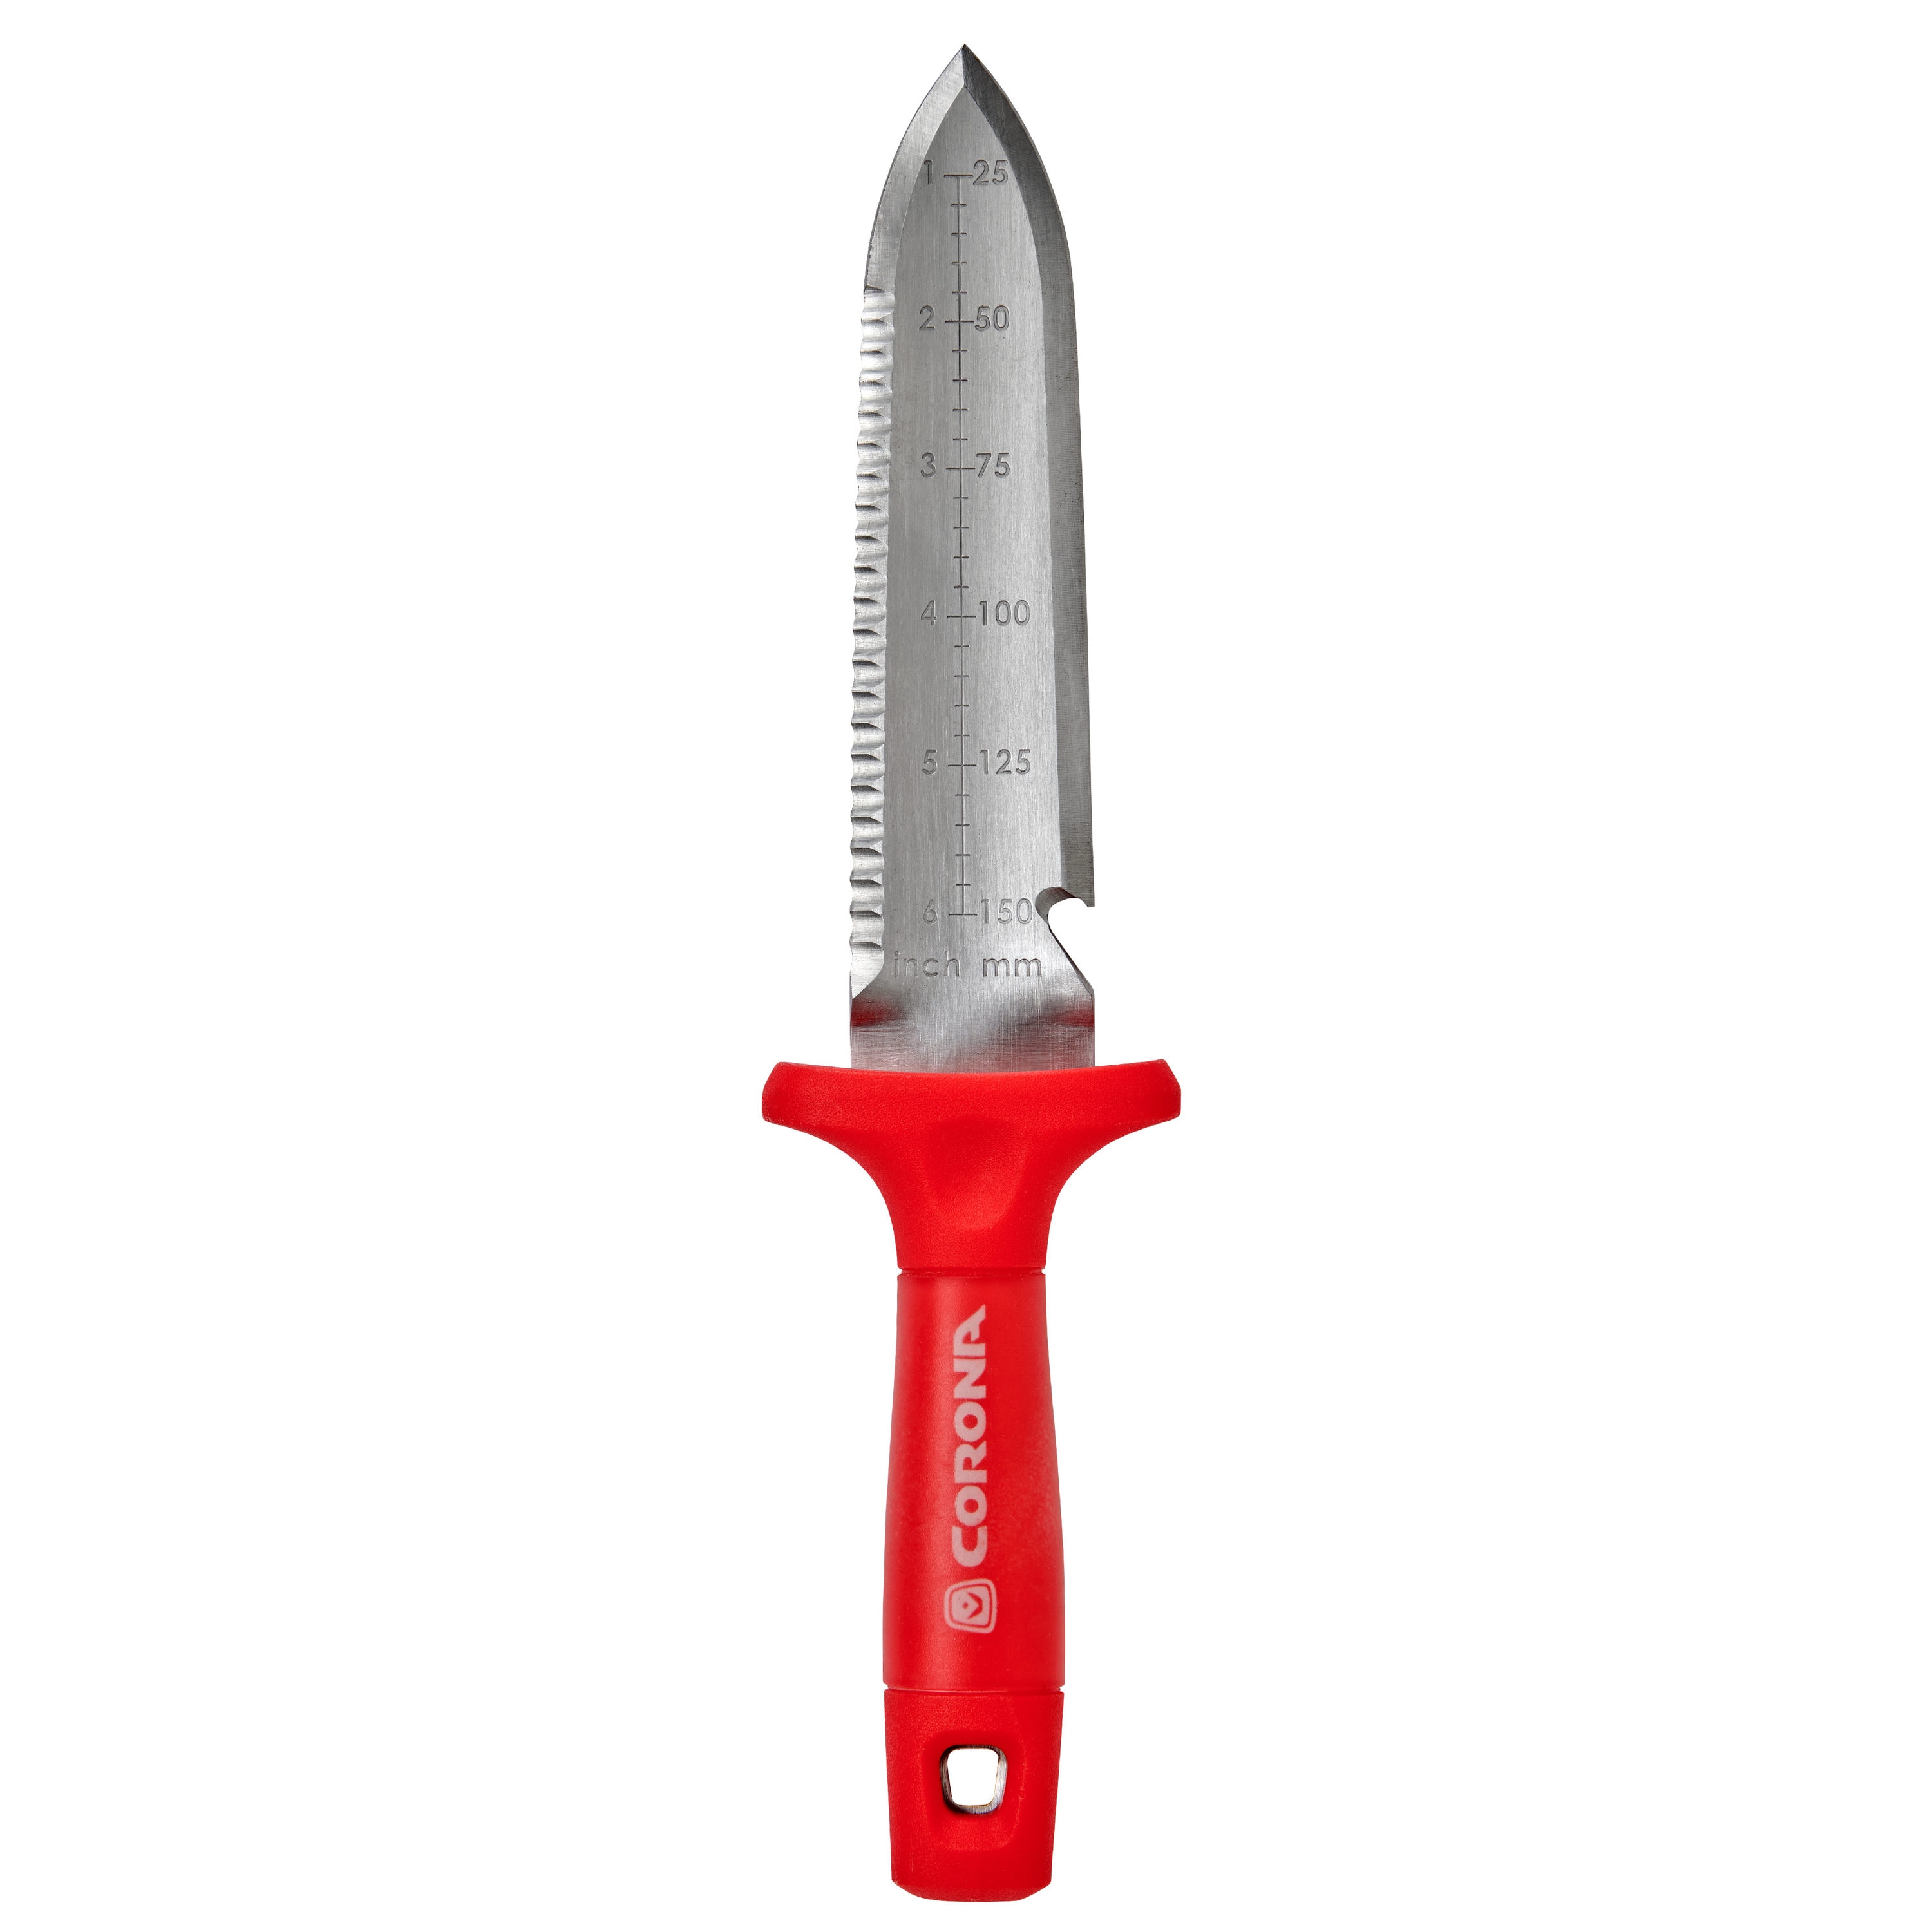 Sharp Handheld Meat Knife, Outdoor Multifunctional Small Straight